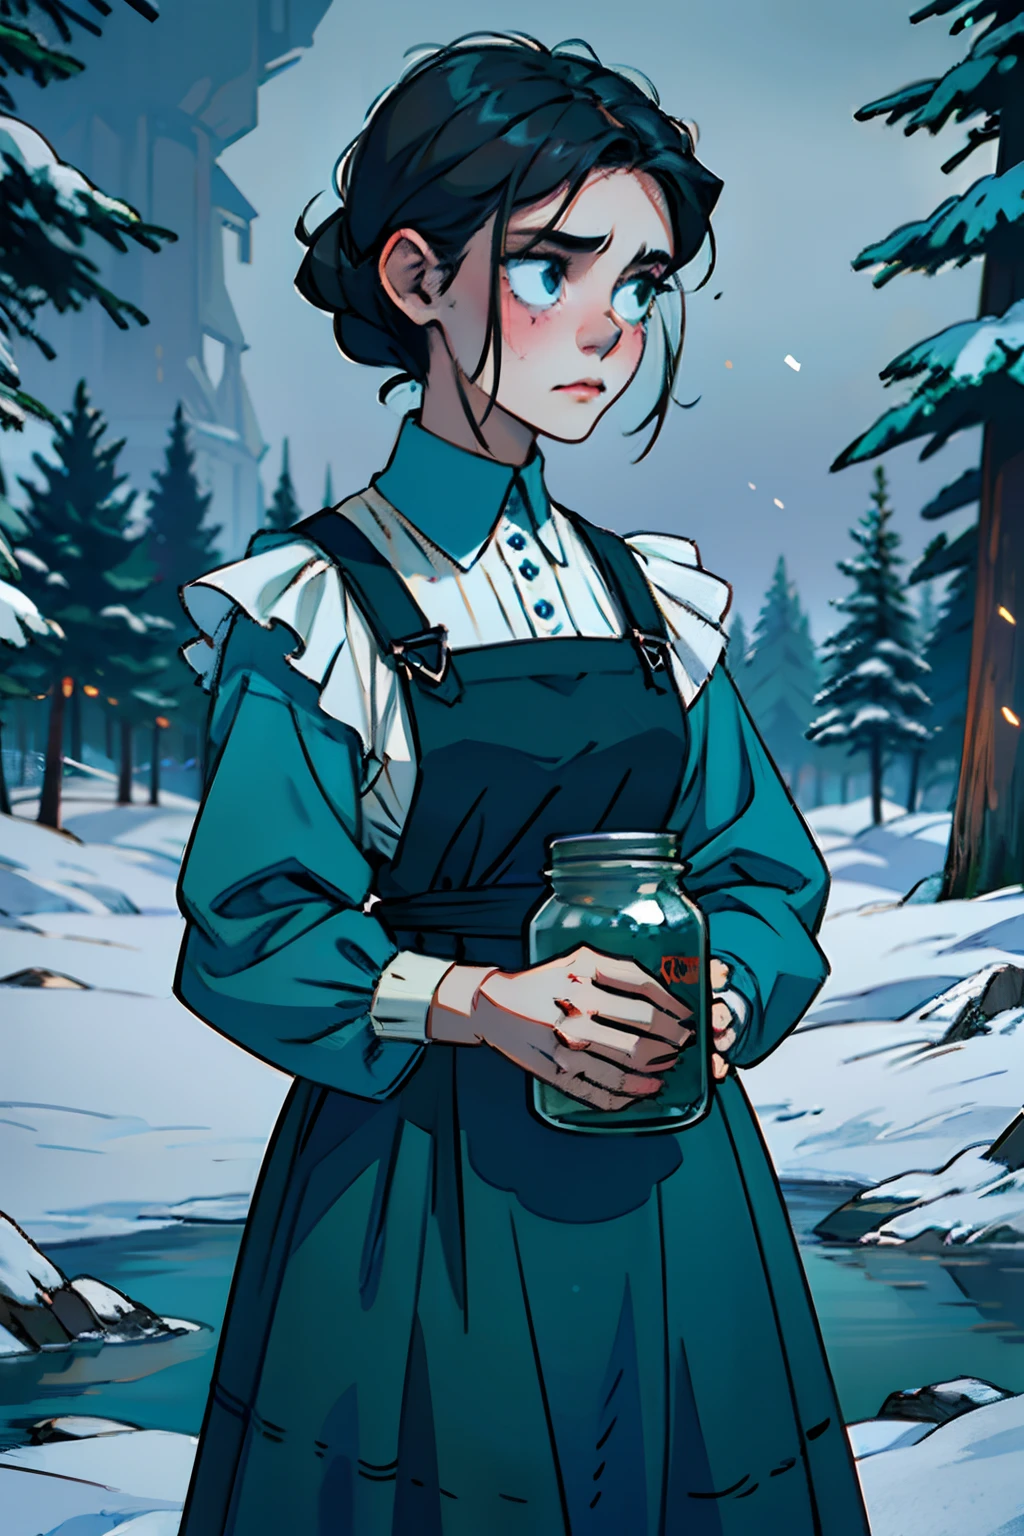 A spooky zombie girl with a dead stare, wearing a black pinafore dress, standing in the snow, holding an empty jar in her arms, background is wintery pine trees, dark eerie light, with an old tattered doll in the snow, mood is silent, sad, character design.